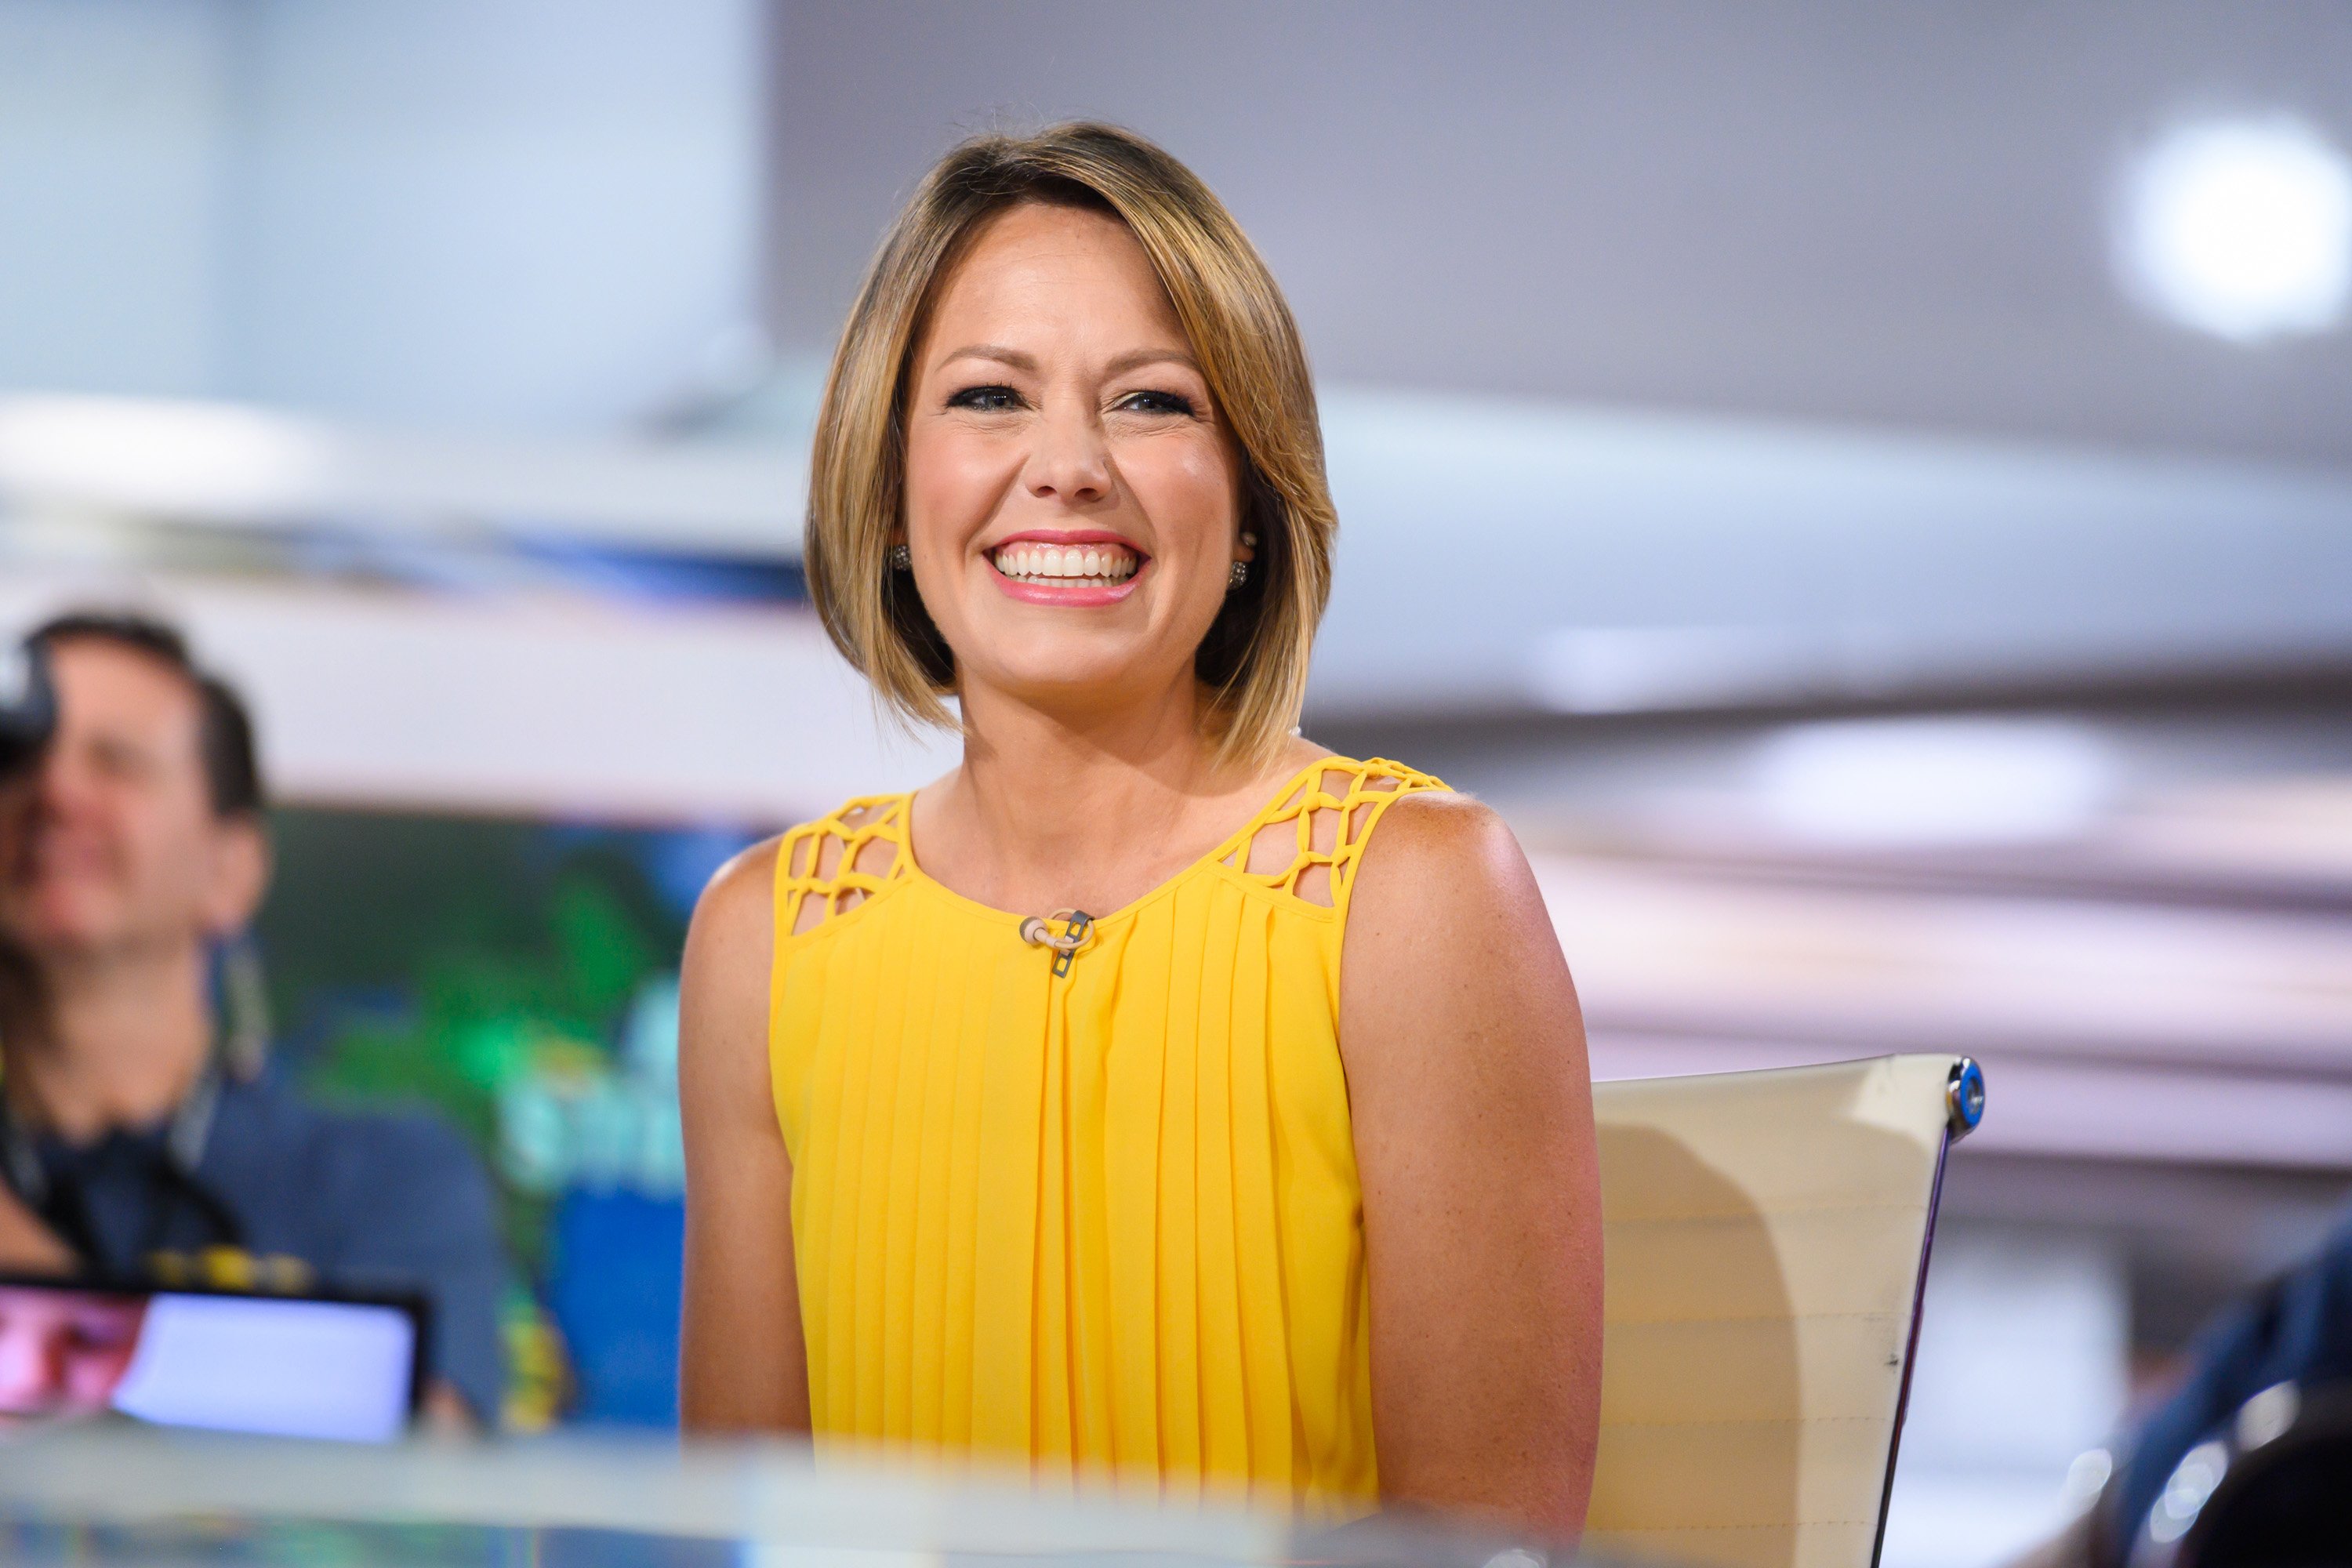 Dylan Dreyer poses on season 68 of the "Today Show" on Wednesday, July 17, 2019 | Photo: Getty Images